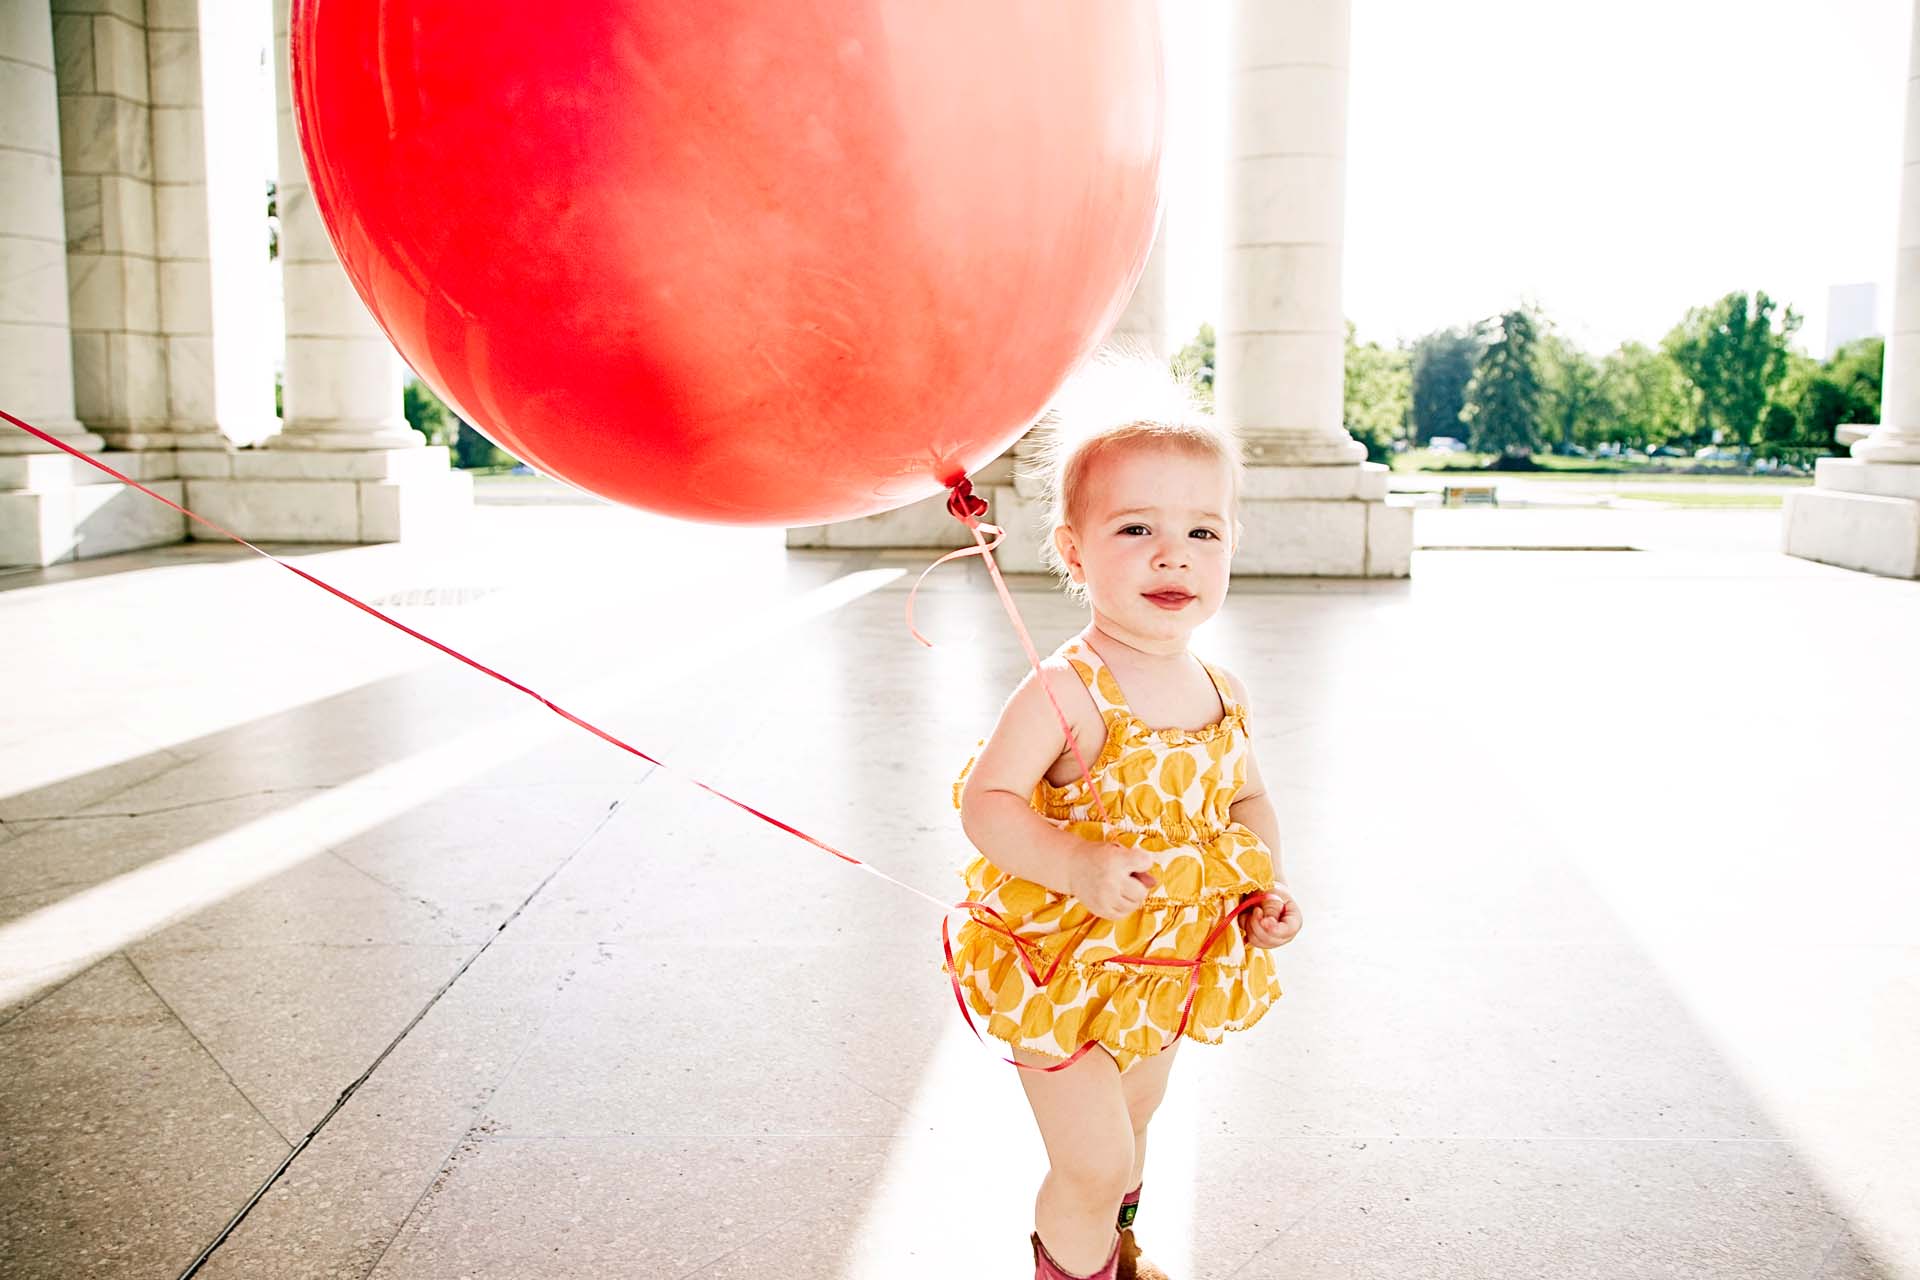 Marianne with her big balloon at her family portrait photography session in Cheesman Park